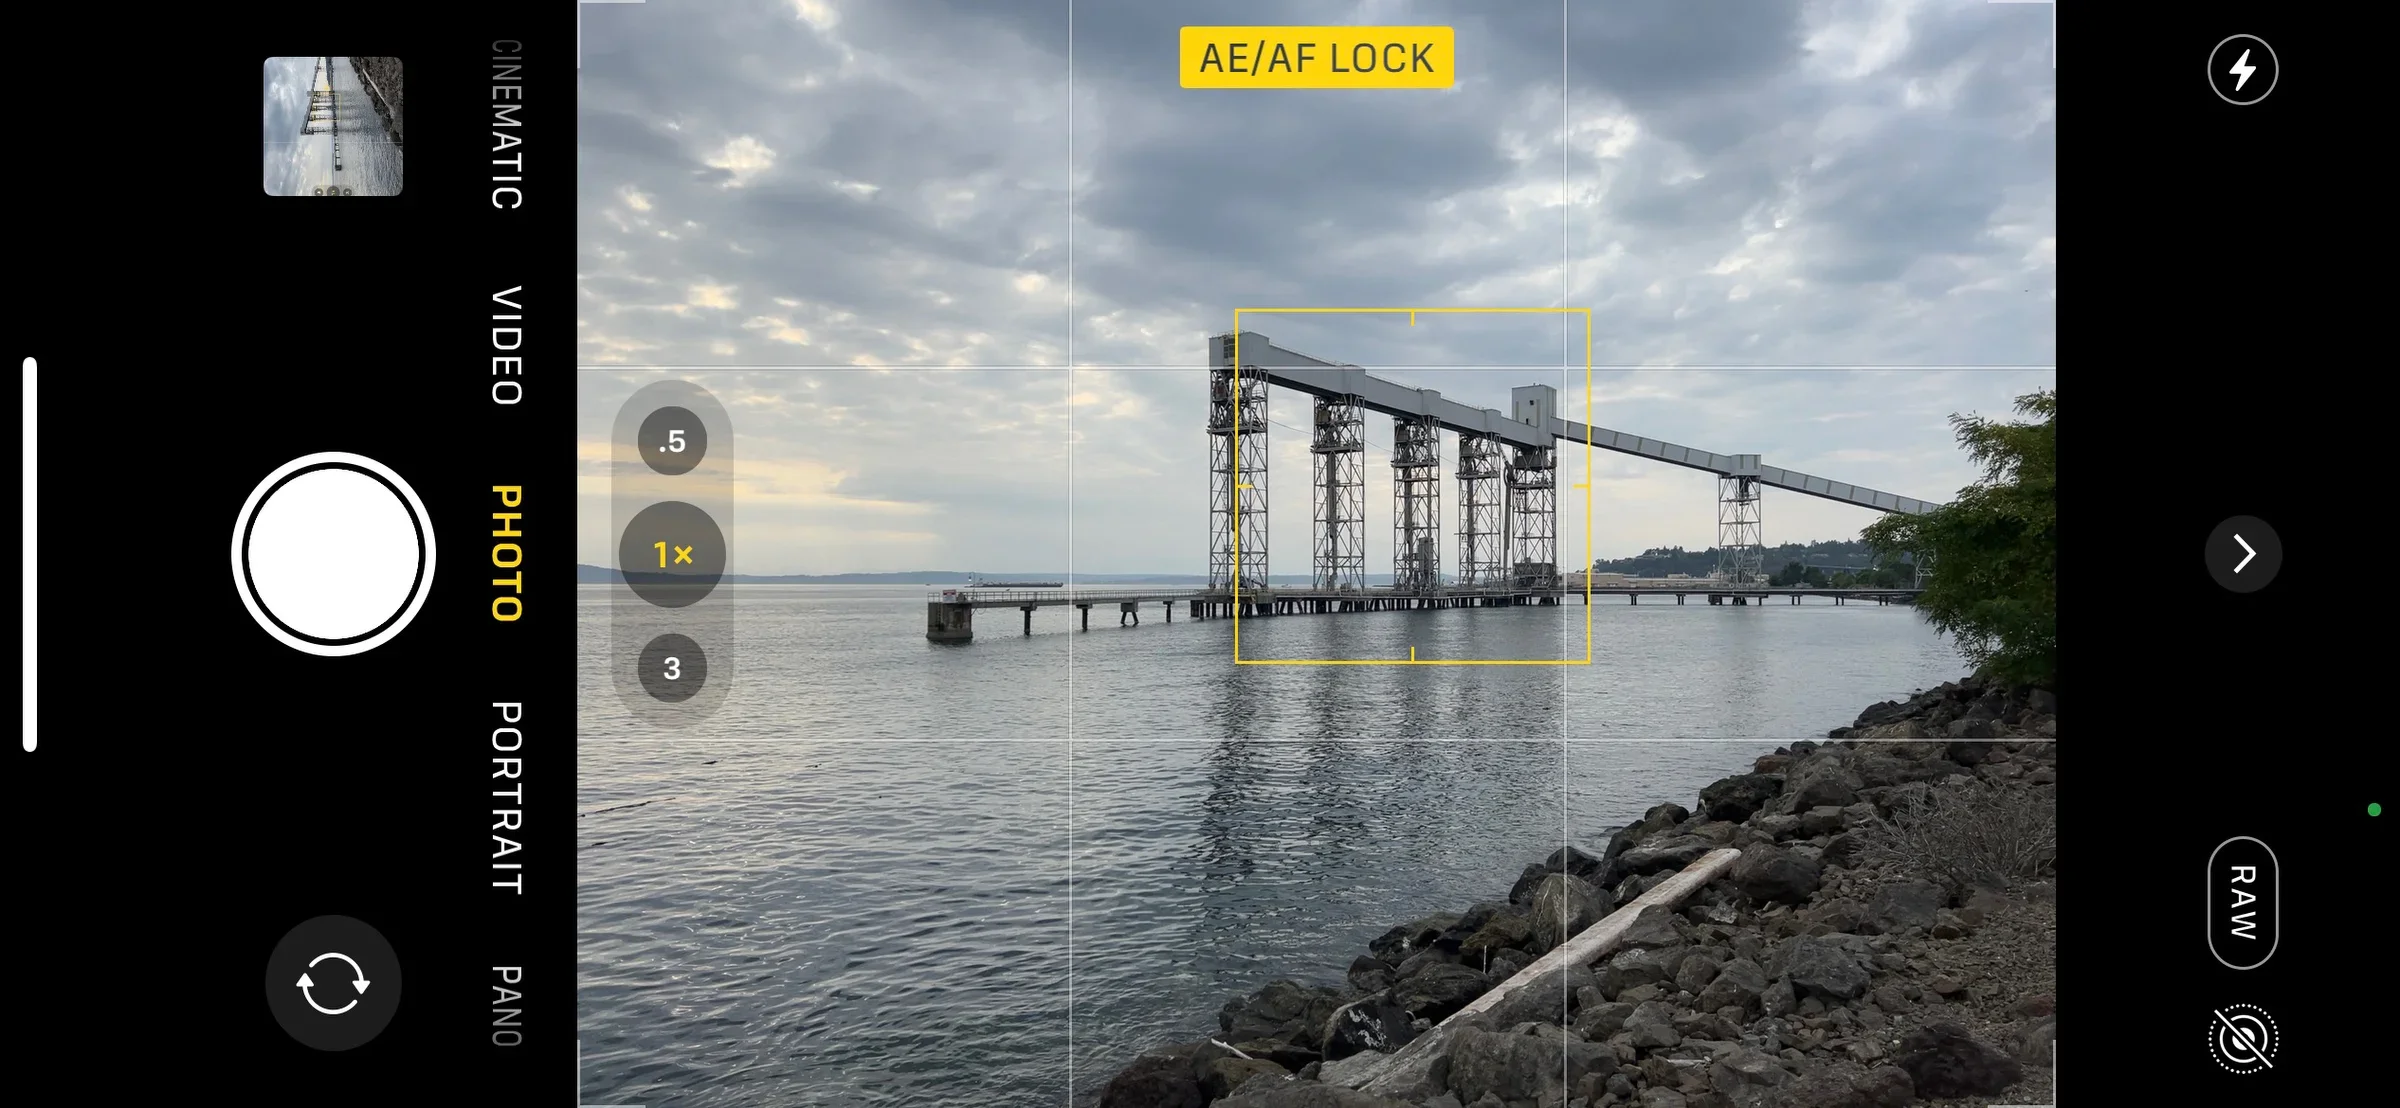 Your Smartphone Camera Has Great Hidden Features – Here's How To Find Them